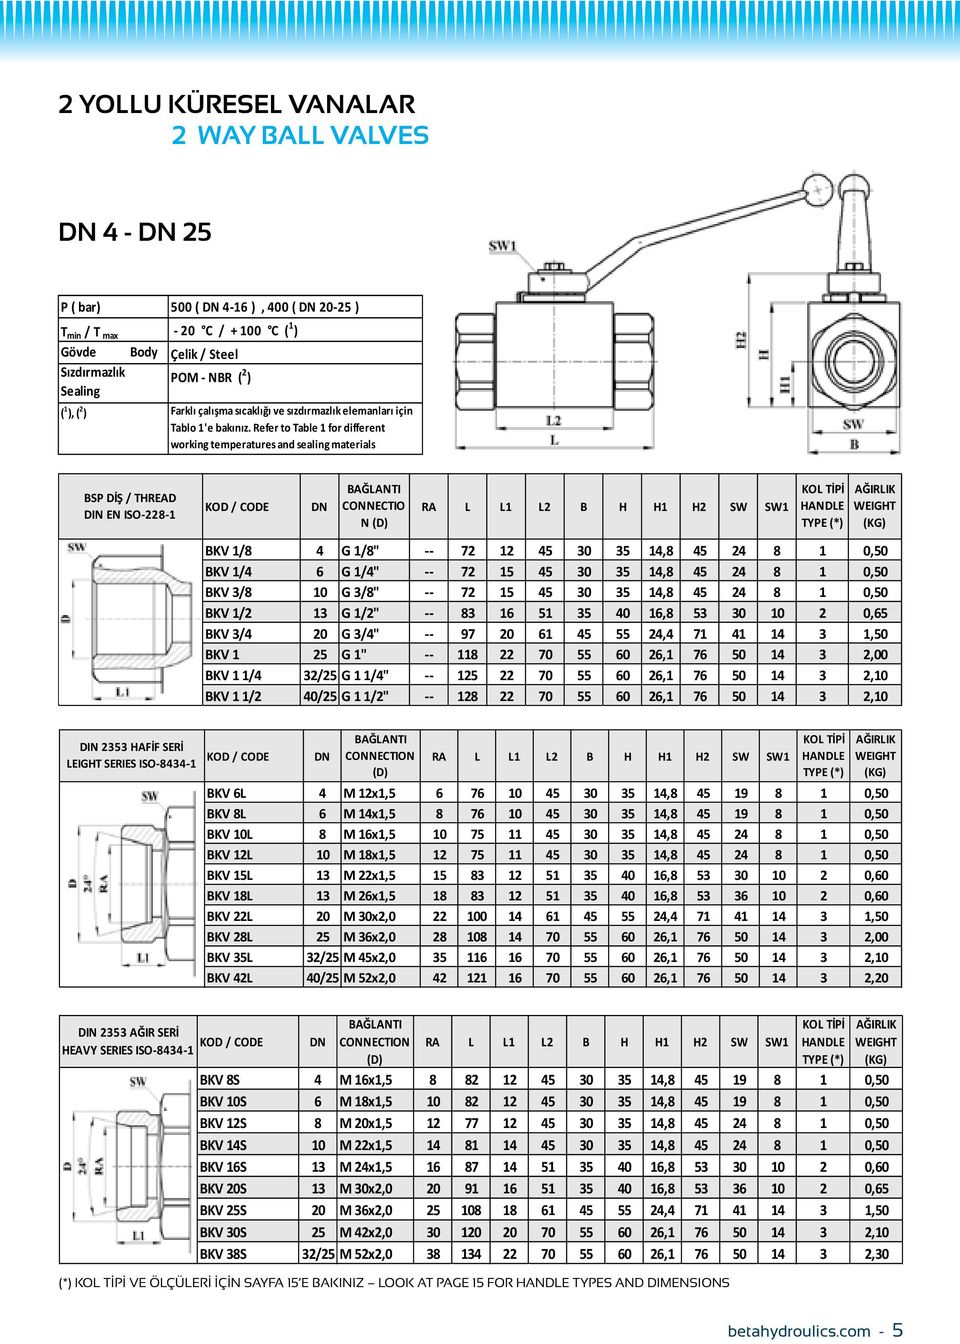 Refer to Table 1 for different working temperatures and sealing materials BSP DİŞ / THREAD DIN EN ISO-228-1 DN CONNECTIO N (D) RA L L1 L2 B H H1 H2 SW SW1 BKV 1/8 4 G 1/8" -- 72 12 45 30 35 14,8 45